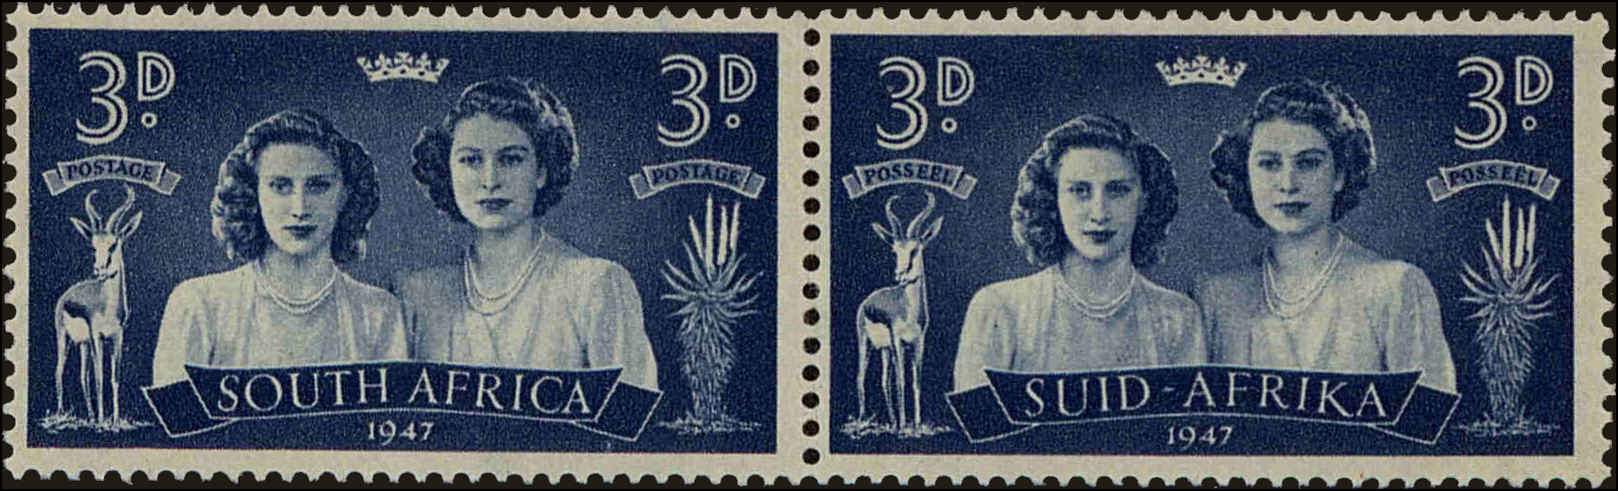 Front view of South Africa 105 collectors stamp